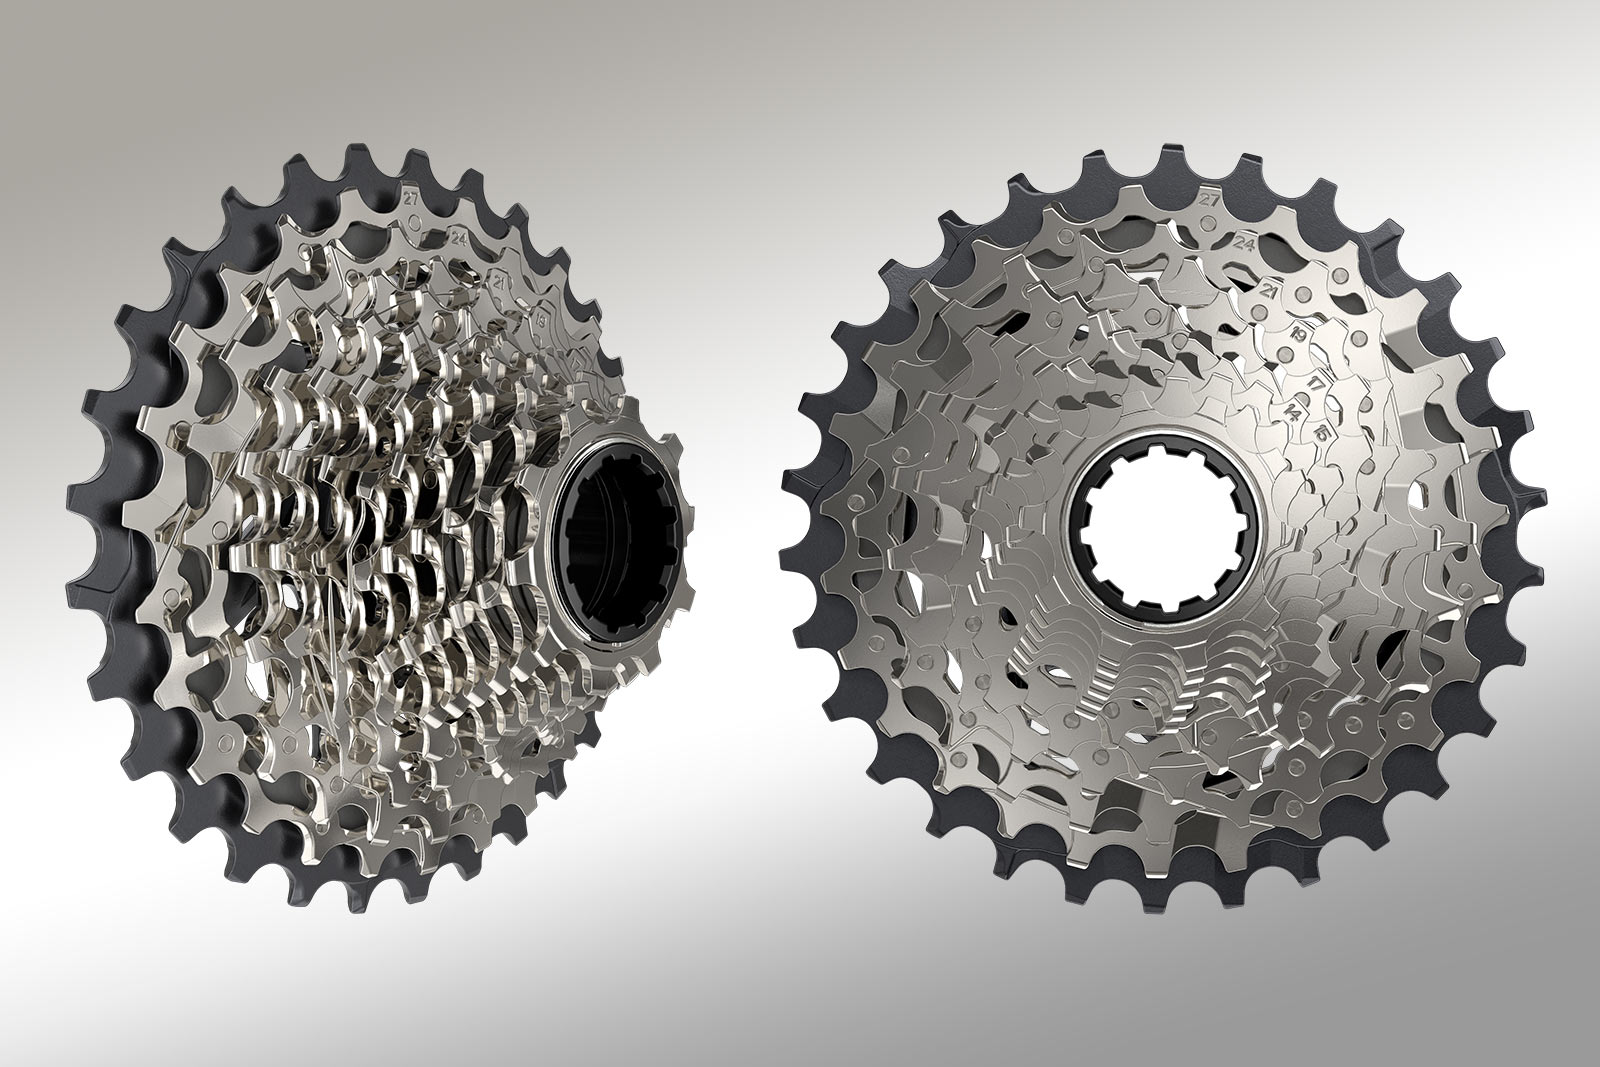 New SRAM Force 10-30 cassette splits the difference for finely